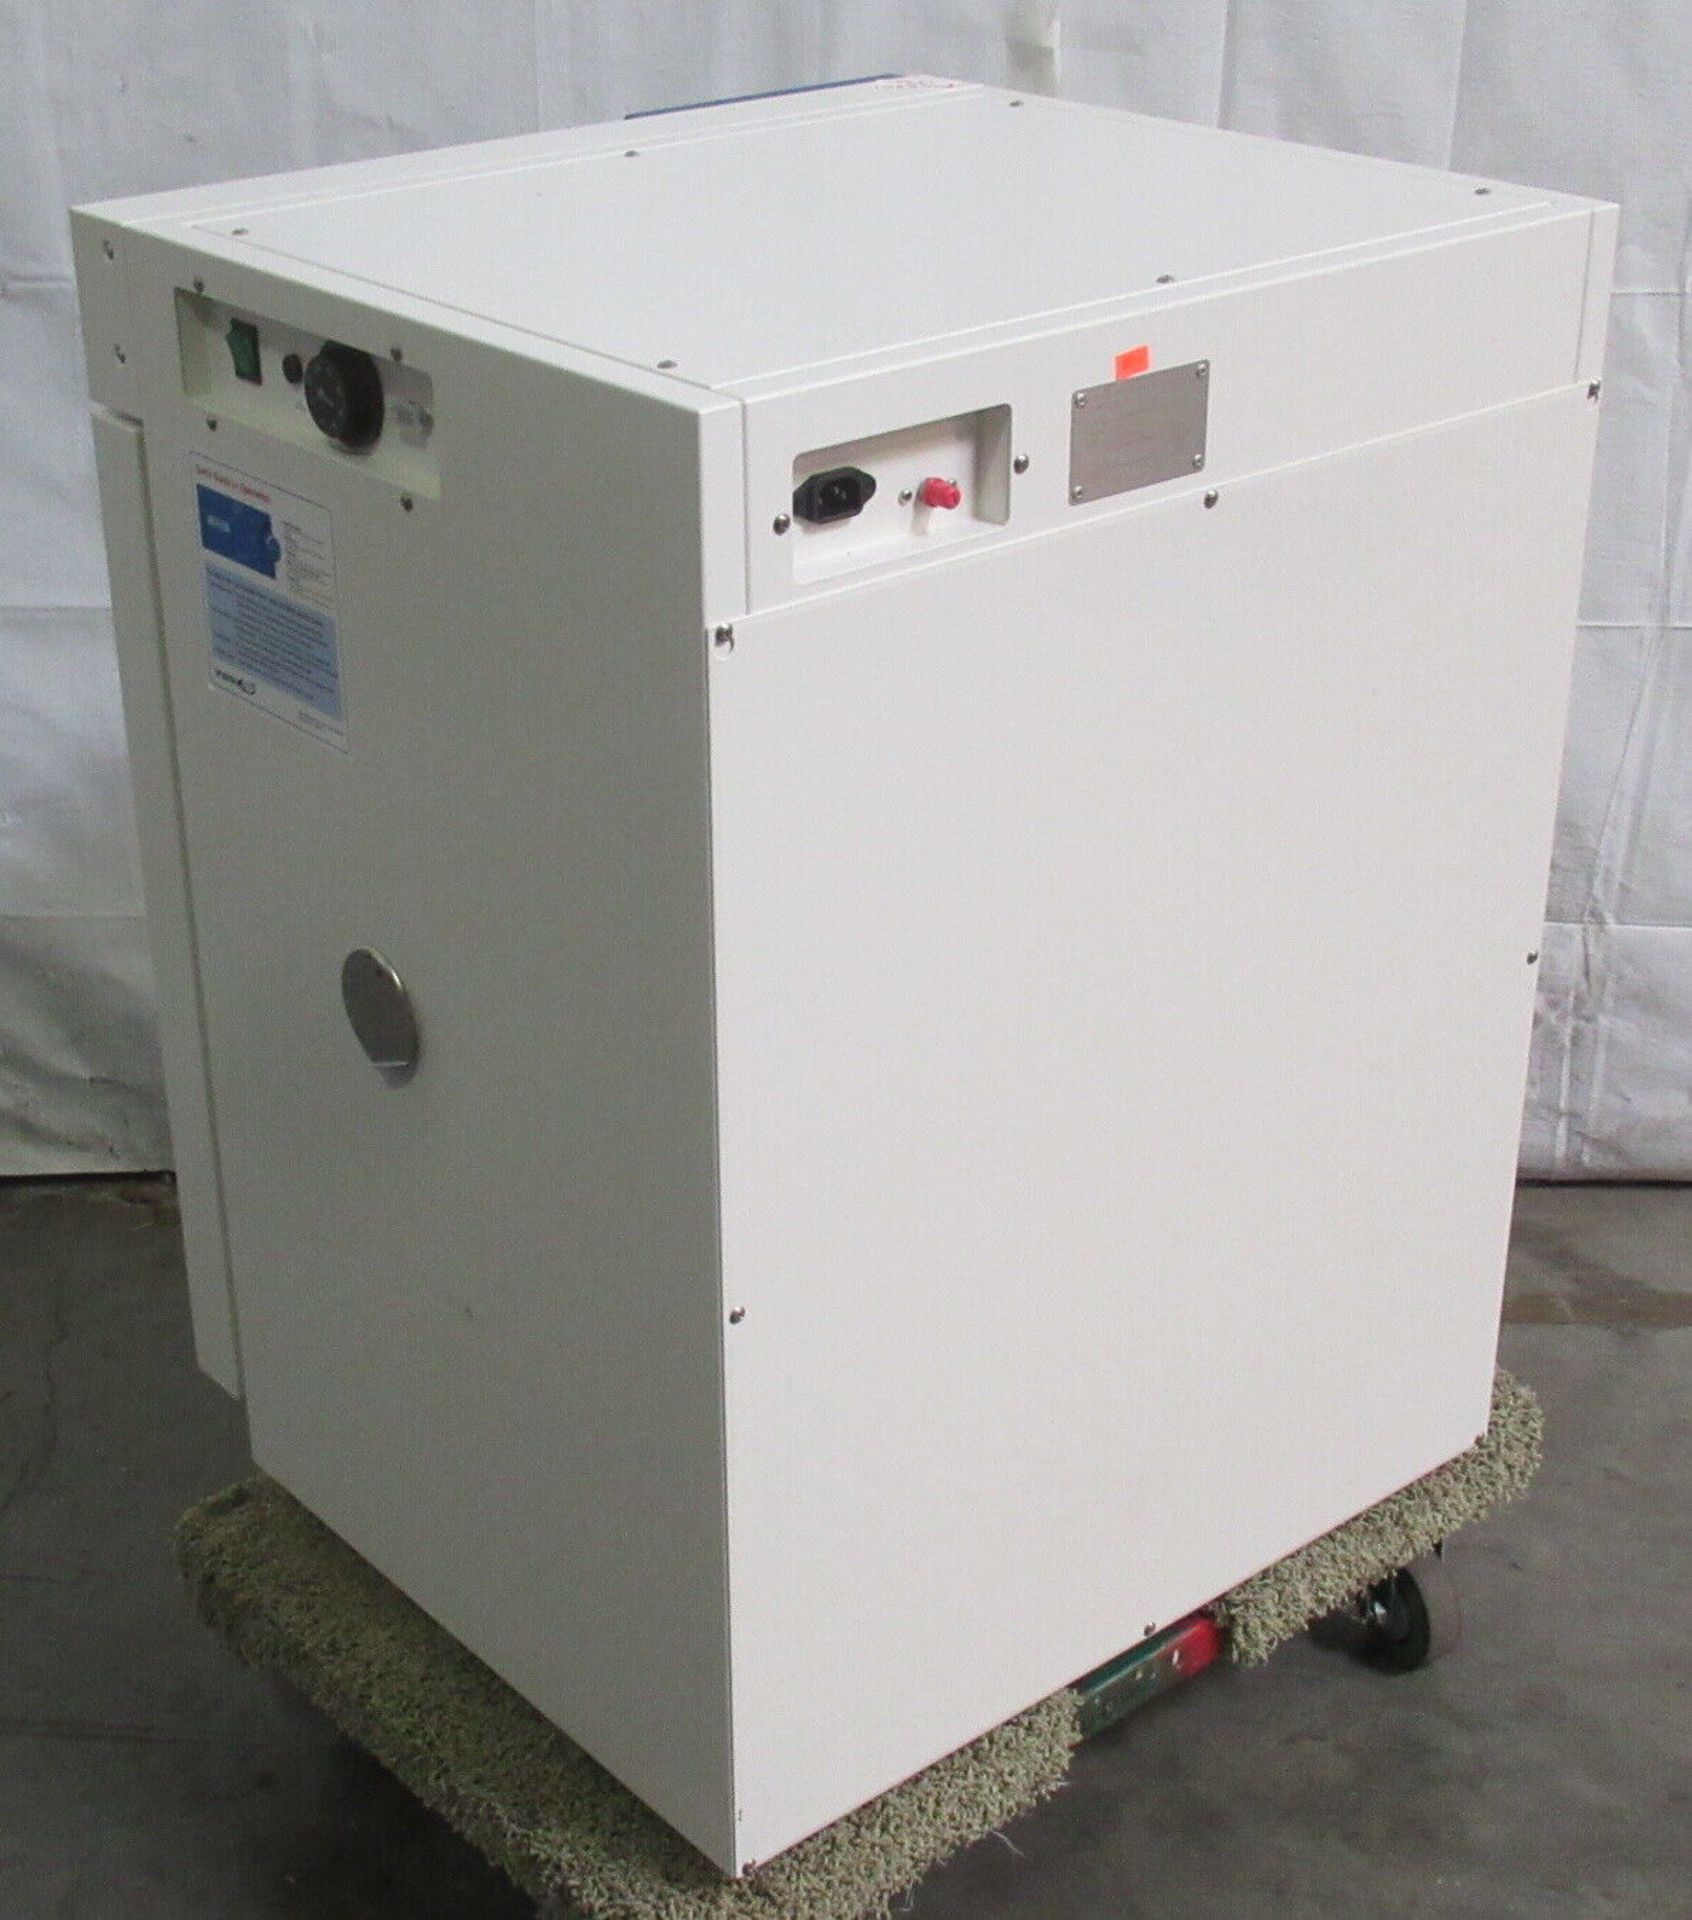 VWR 414005-132 Gravity Convection General Incubator - Image 6 of 8